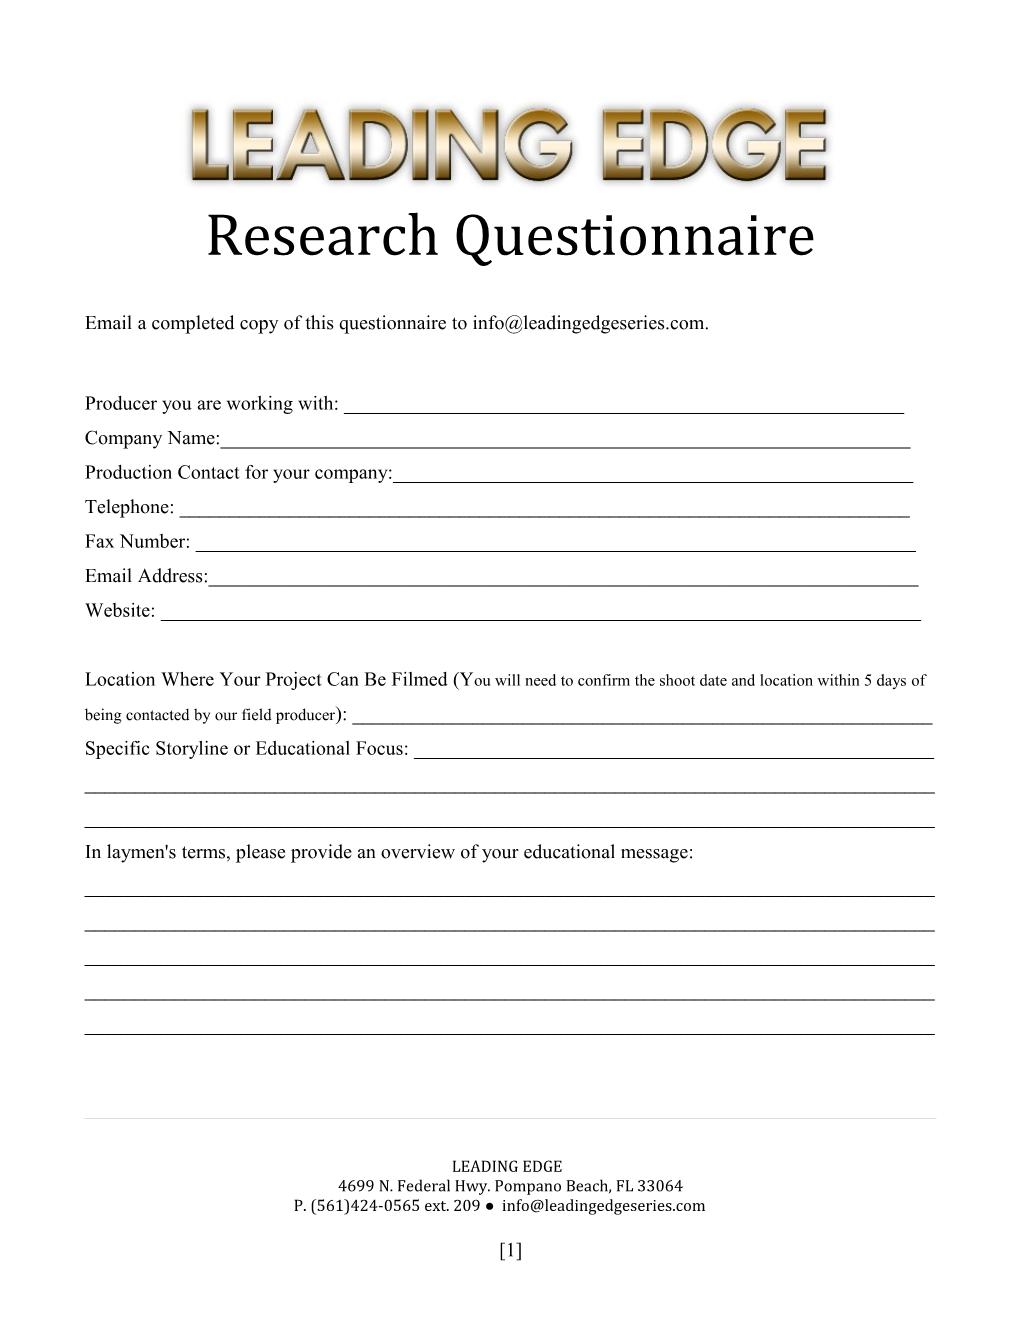 Project Research Questionnaire